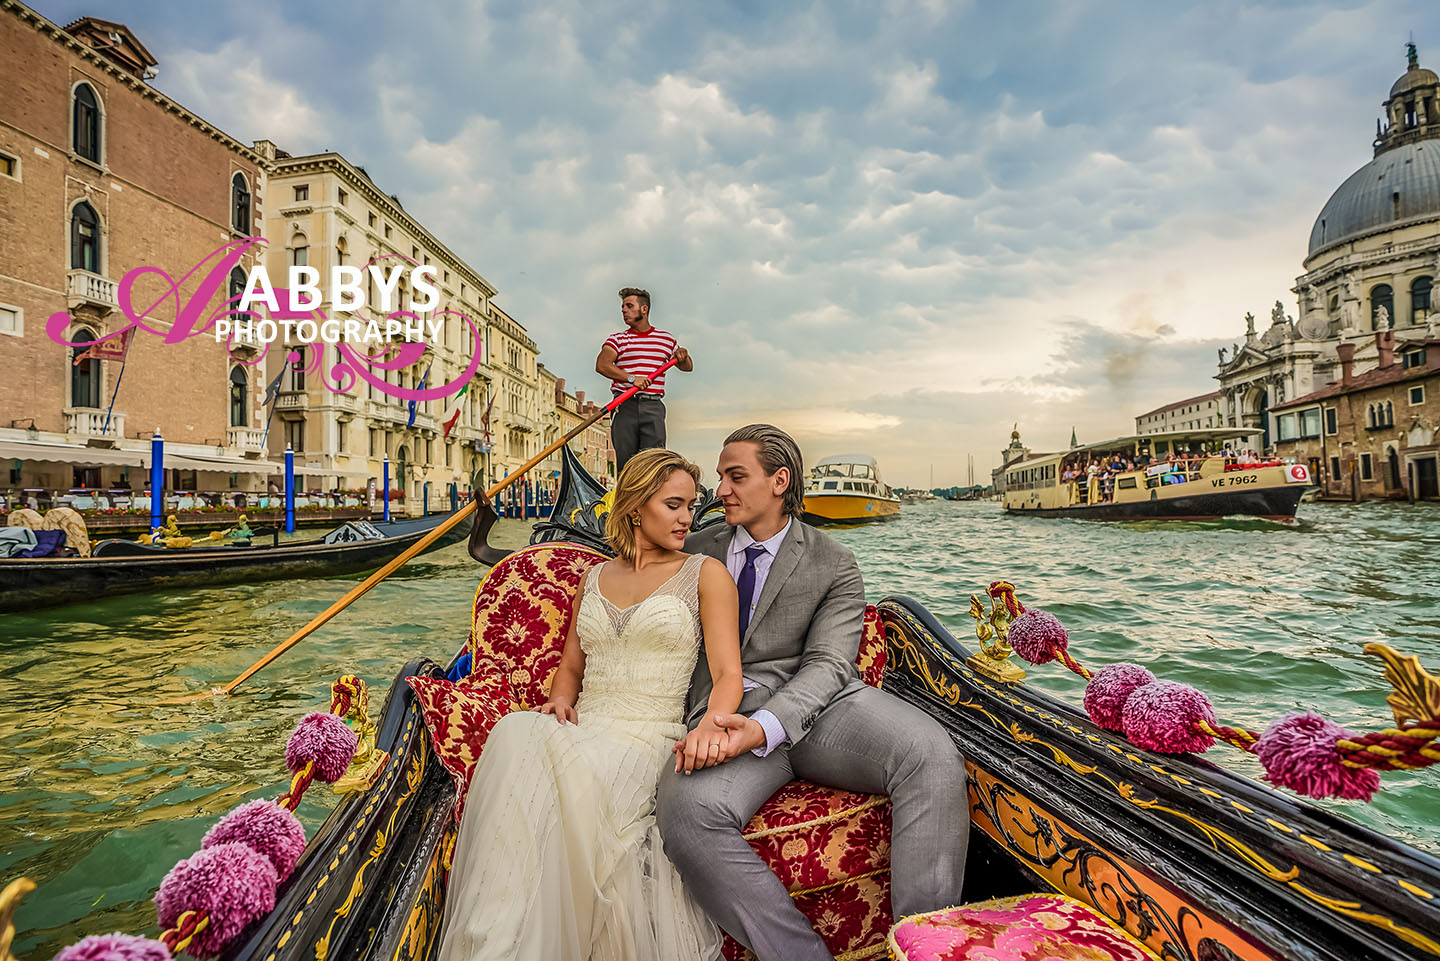 Abbys Photography can make you feel like your wedding or engagement is in Venice instead of Westlake Village. 